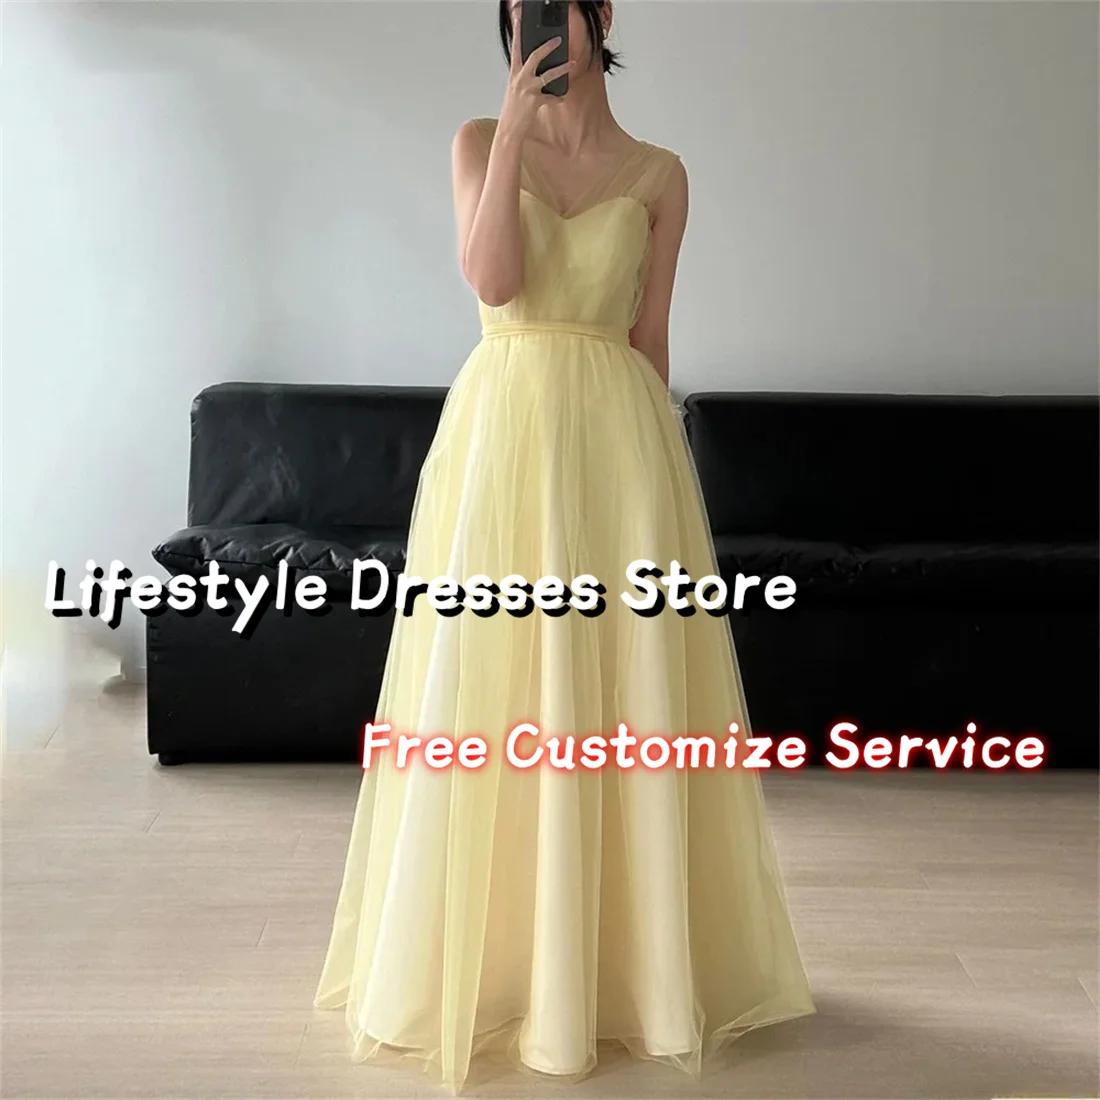 

Blush Yellow Tulle Sleeveless Wedding Dress Simple A Line Evening Dress For Women korea Prom Gowns Photo Formal Dress